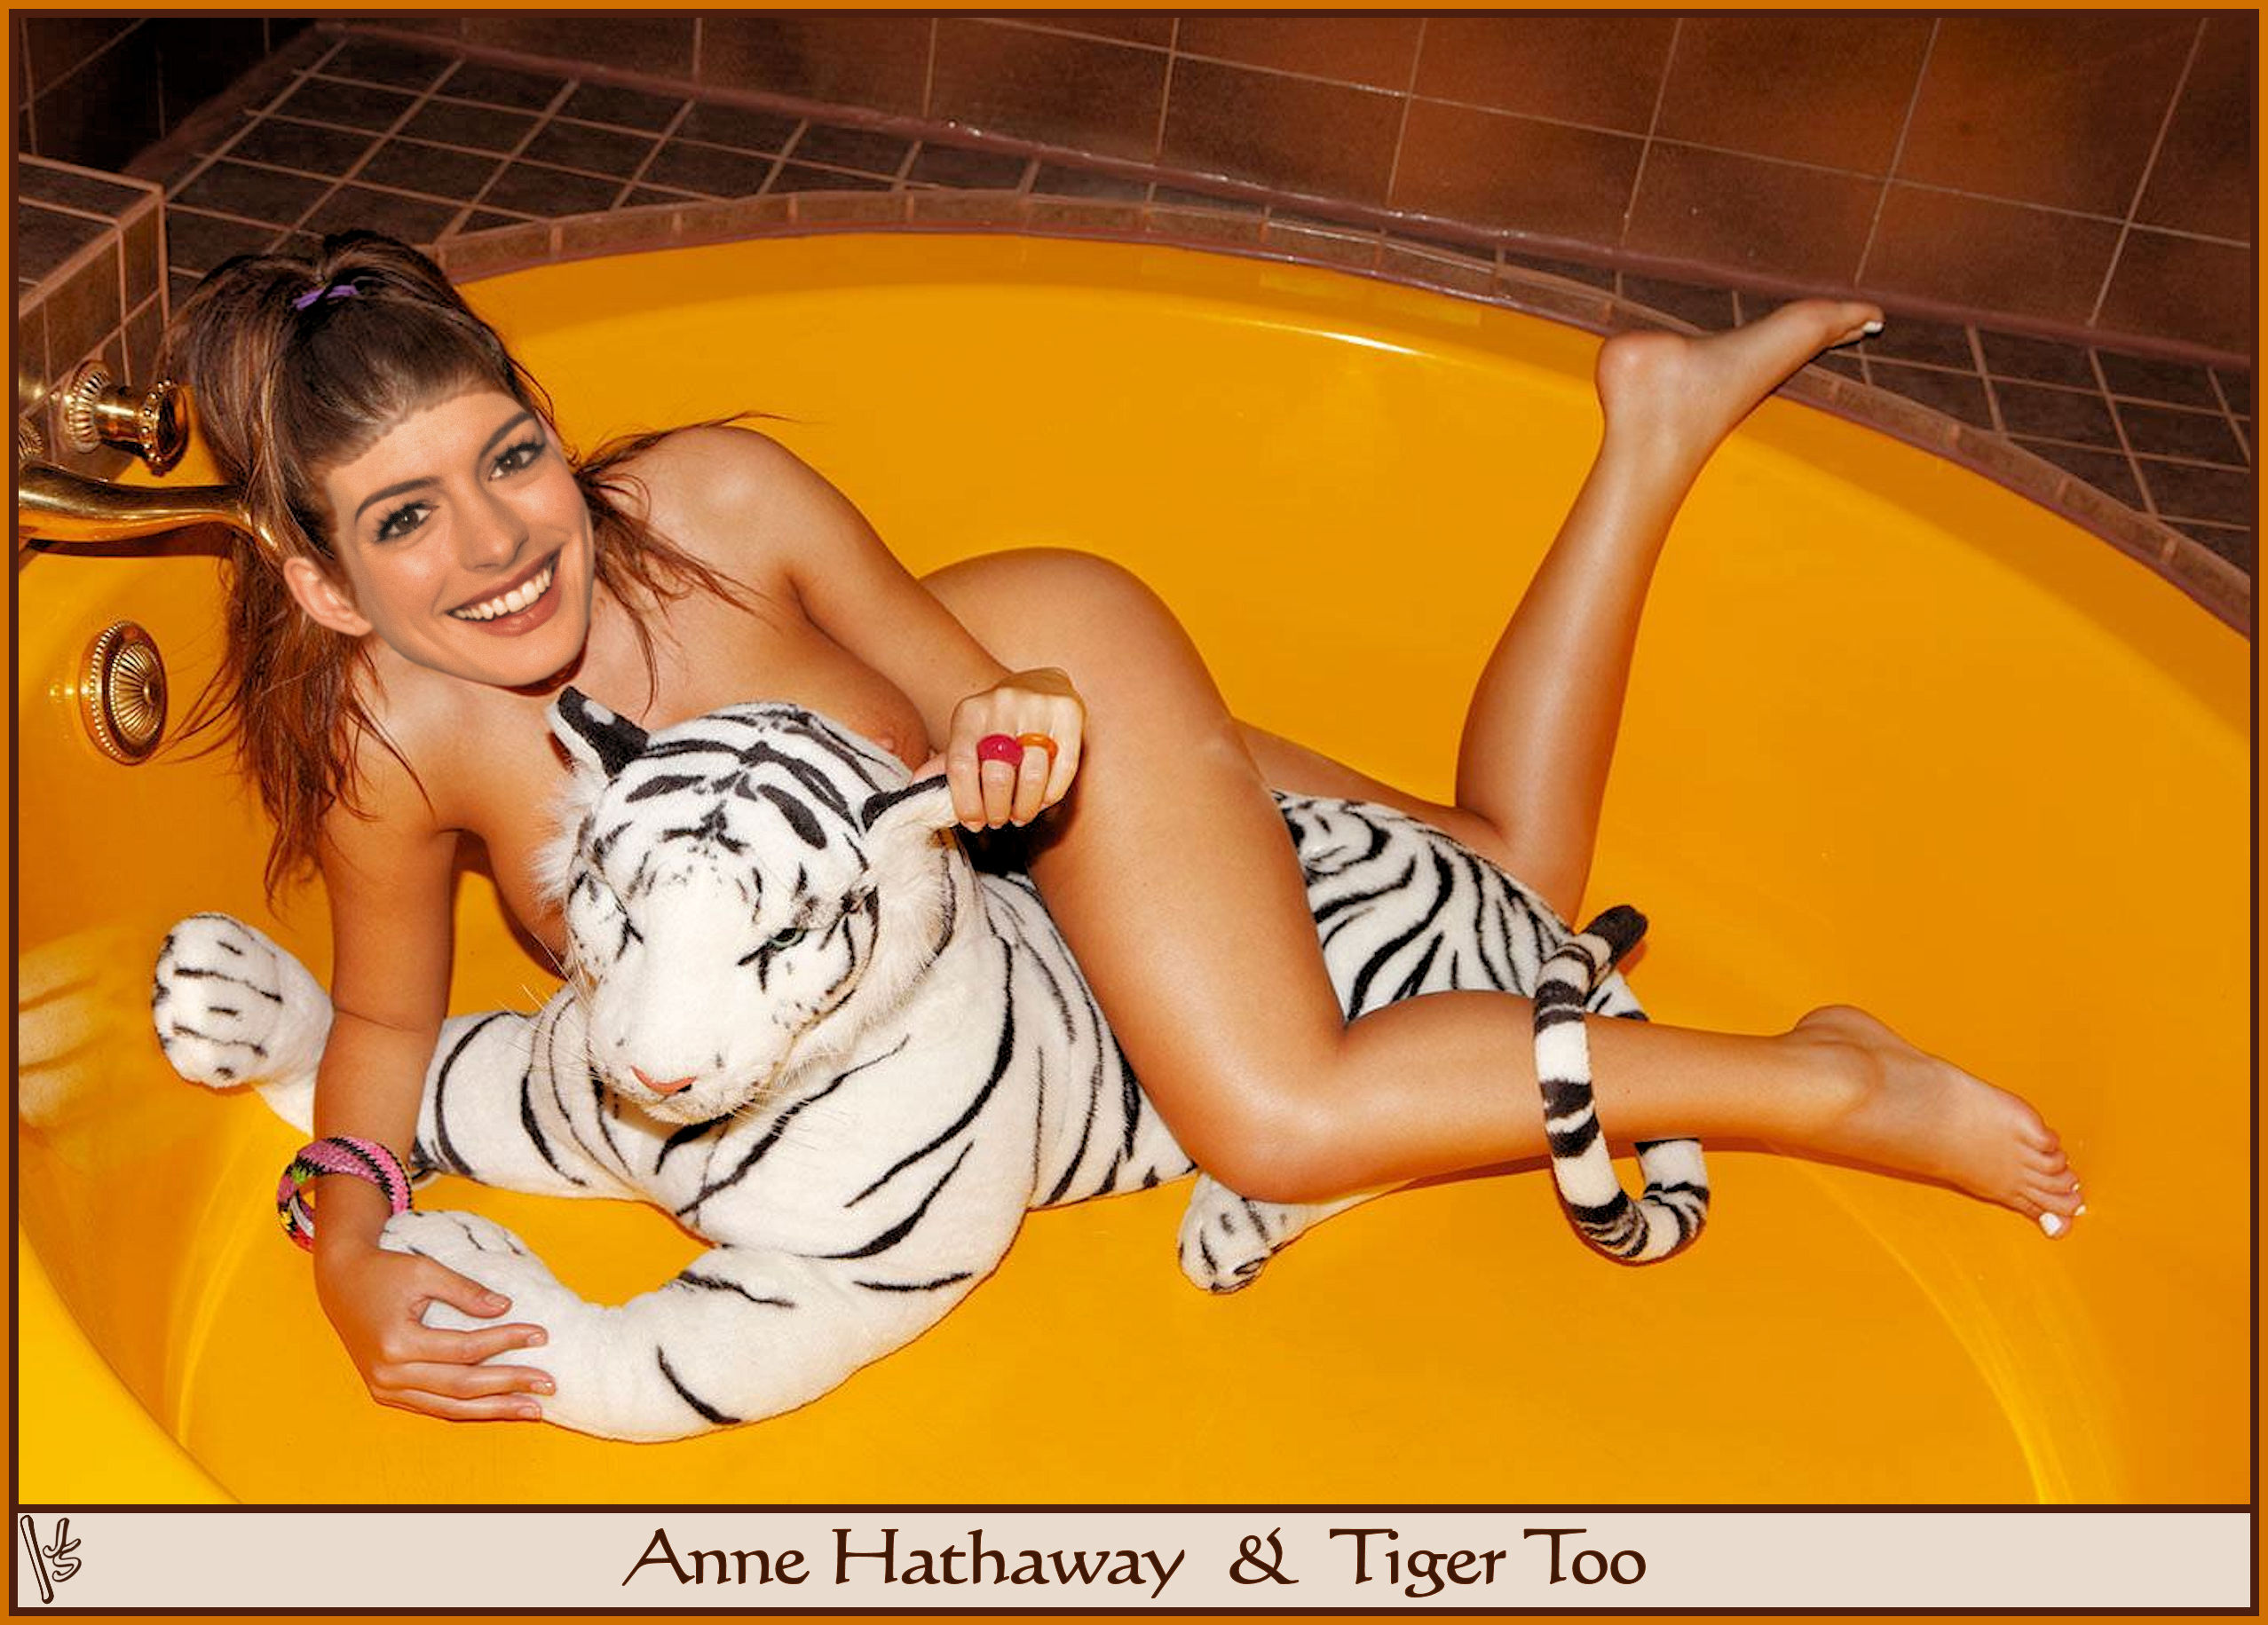 Anne Hathaway Nude Laying on Toy Tiger, MyCelebrityFakes.com